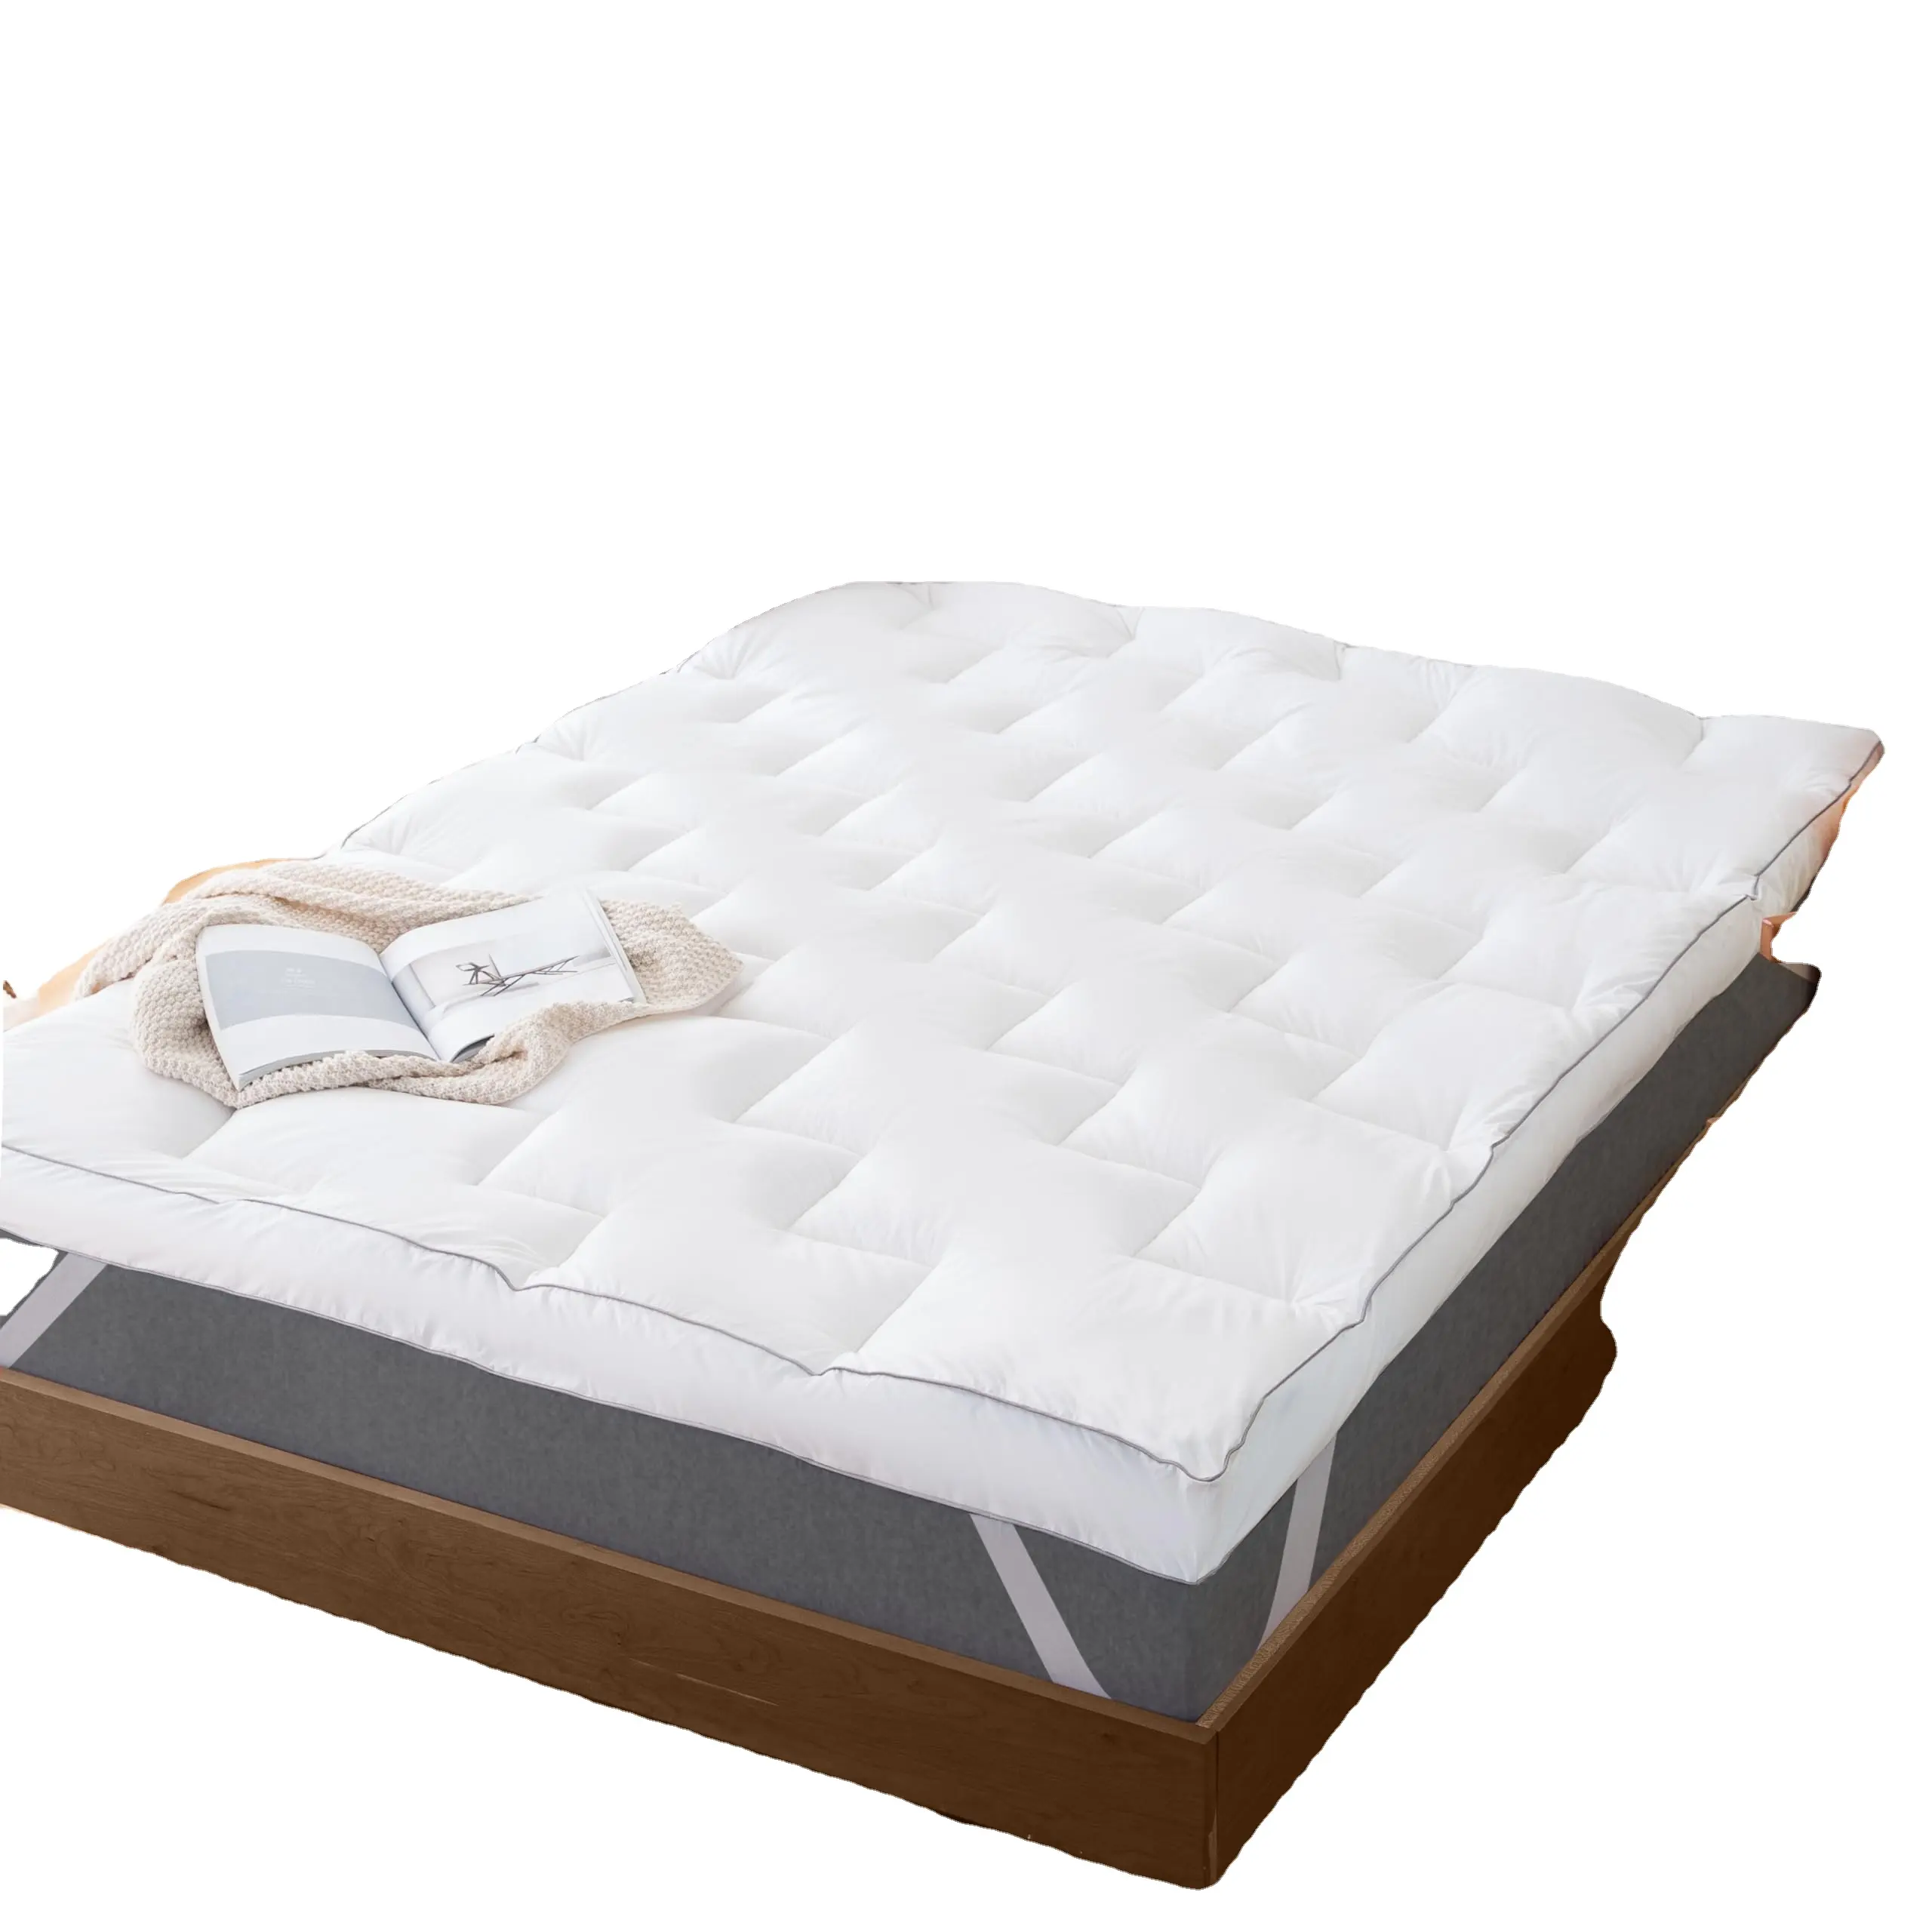 Quilted Cooling Mattress Topper with Deep Pocket Extra Thick Pillow Top Cover for Home Hotel or Hospital Use